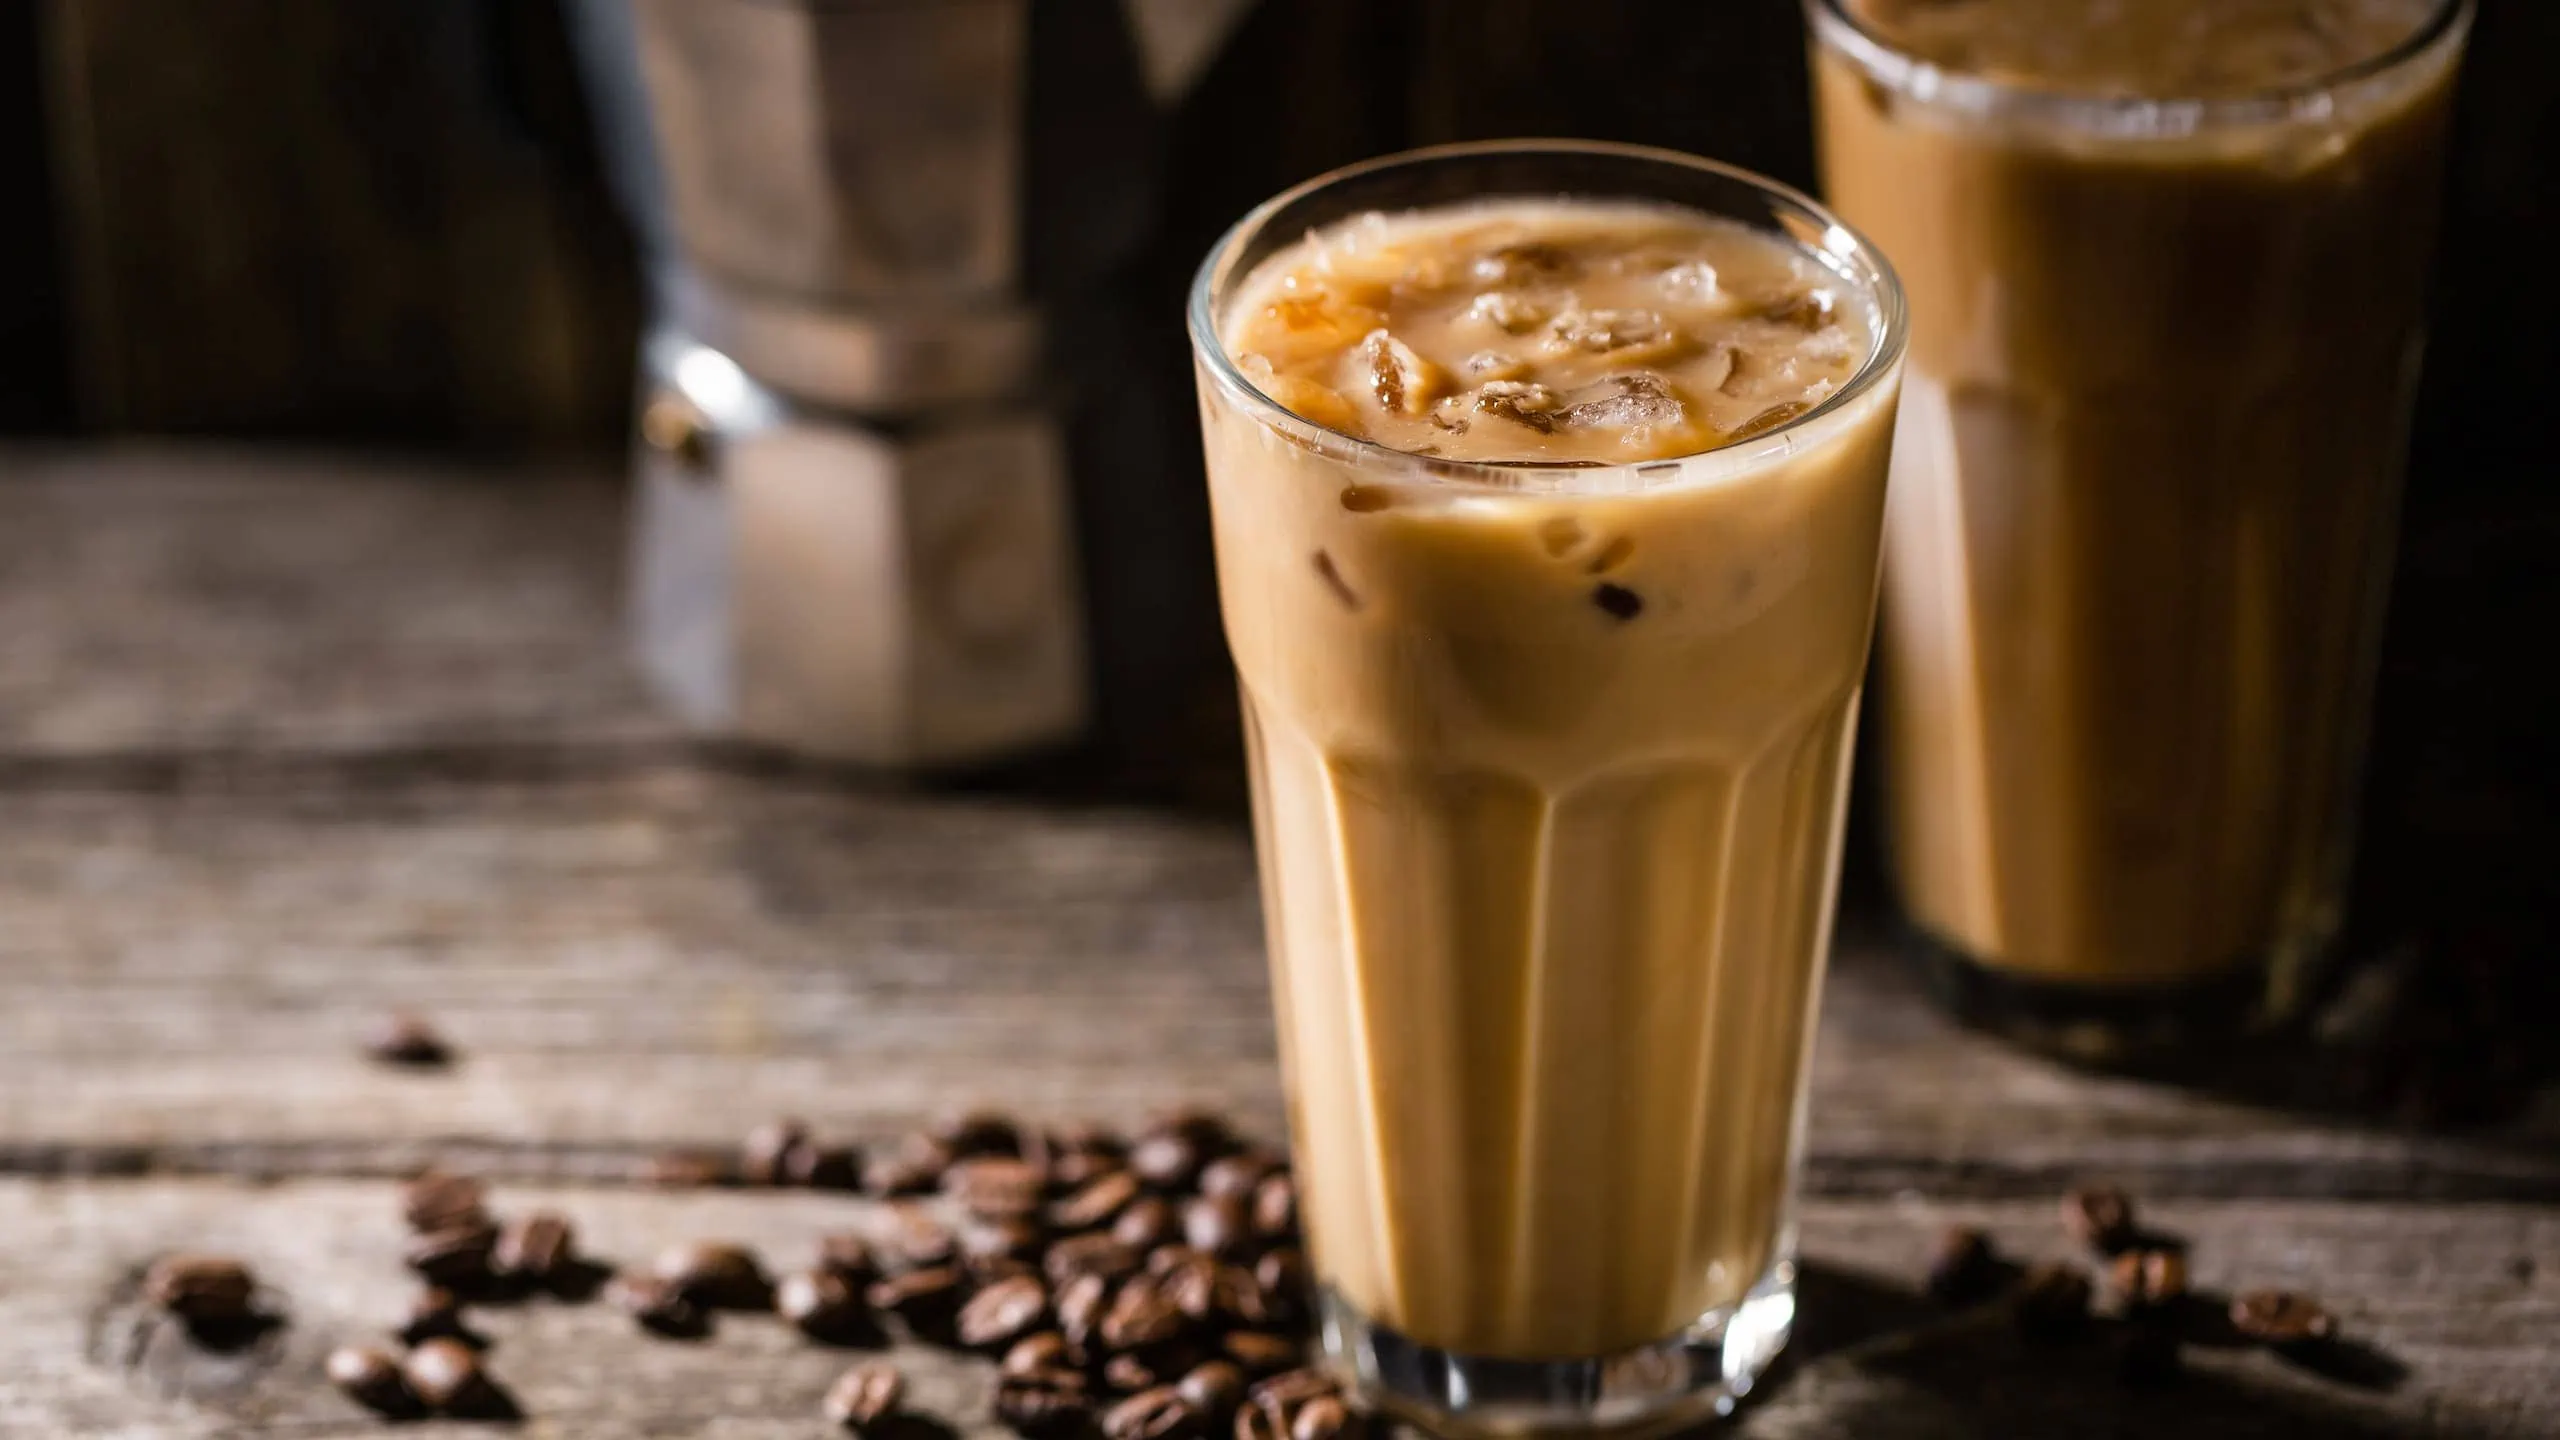 Iced latte My Cafe with coffee beans